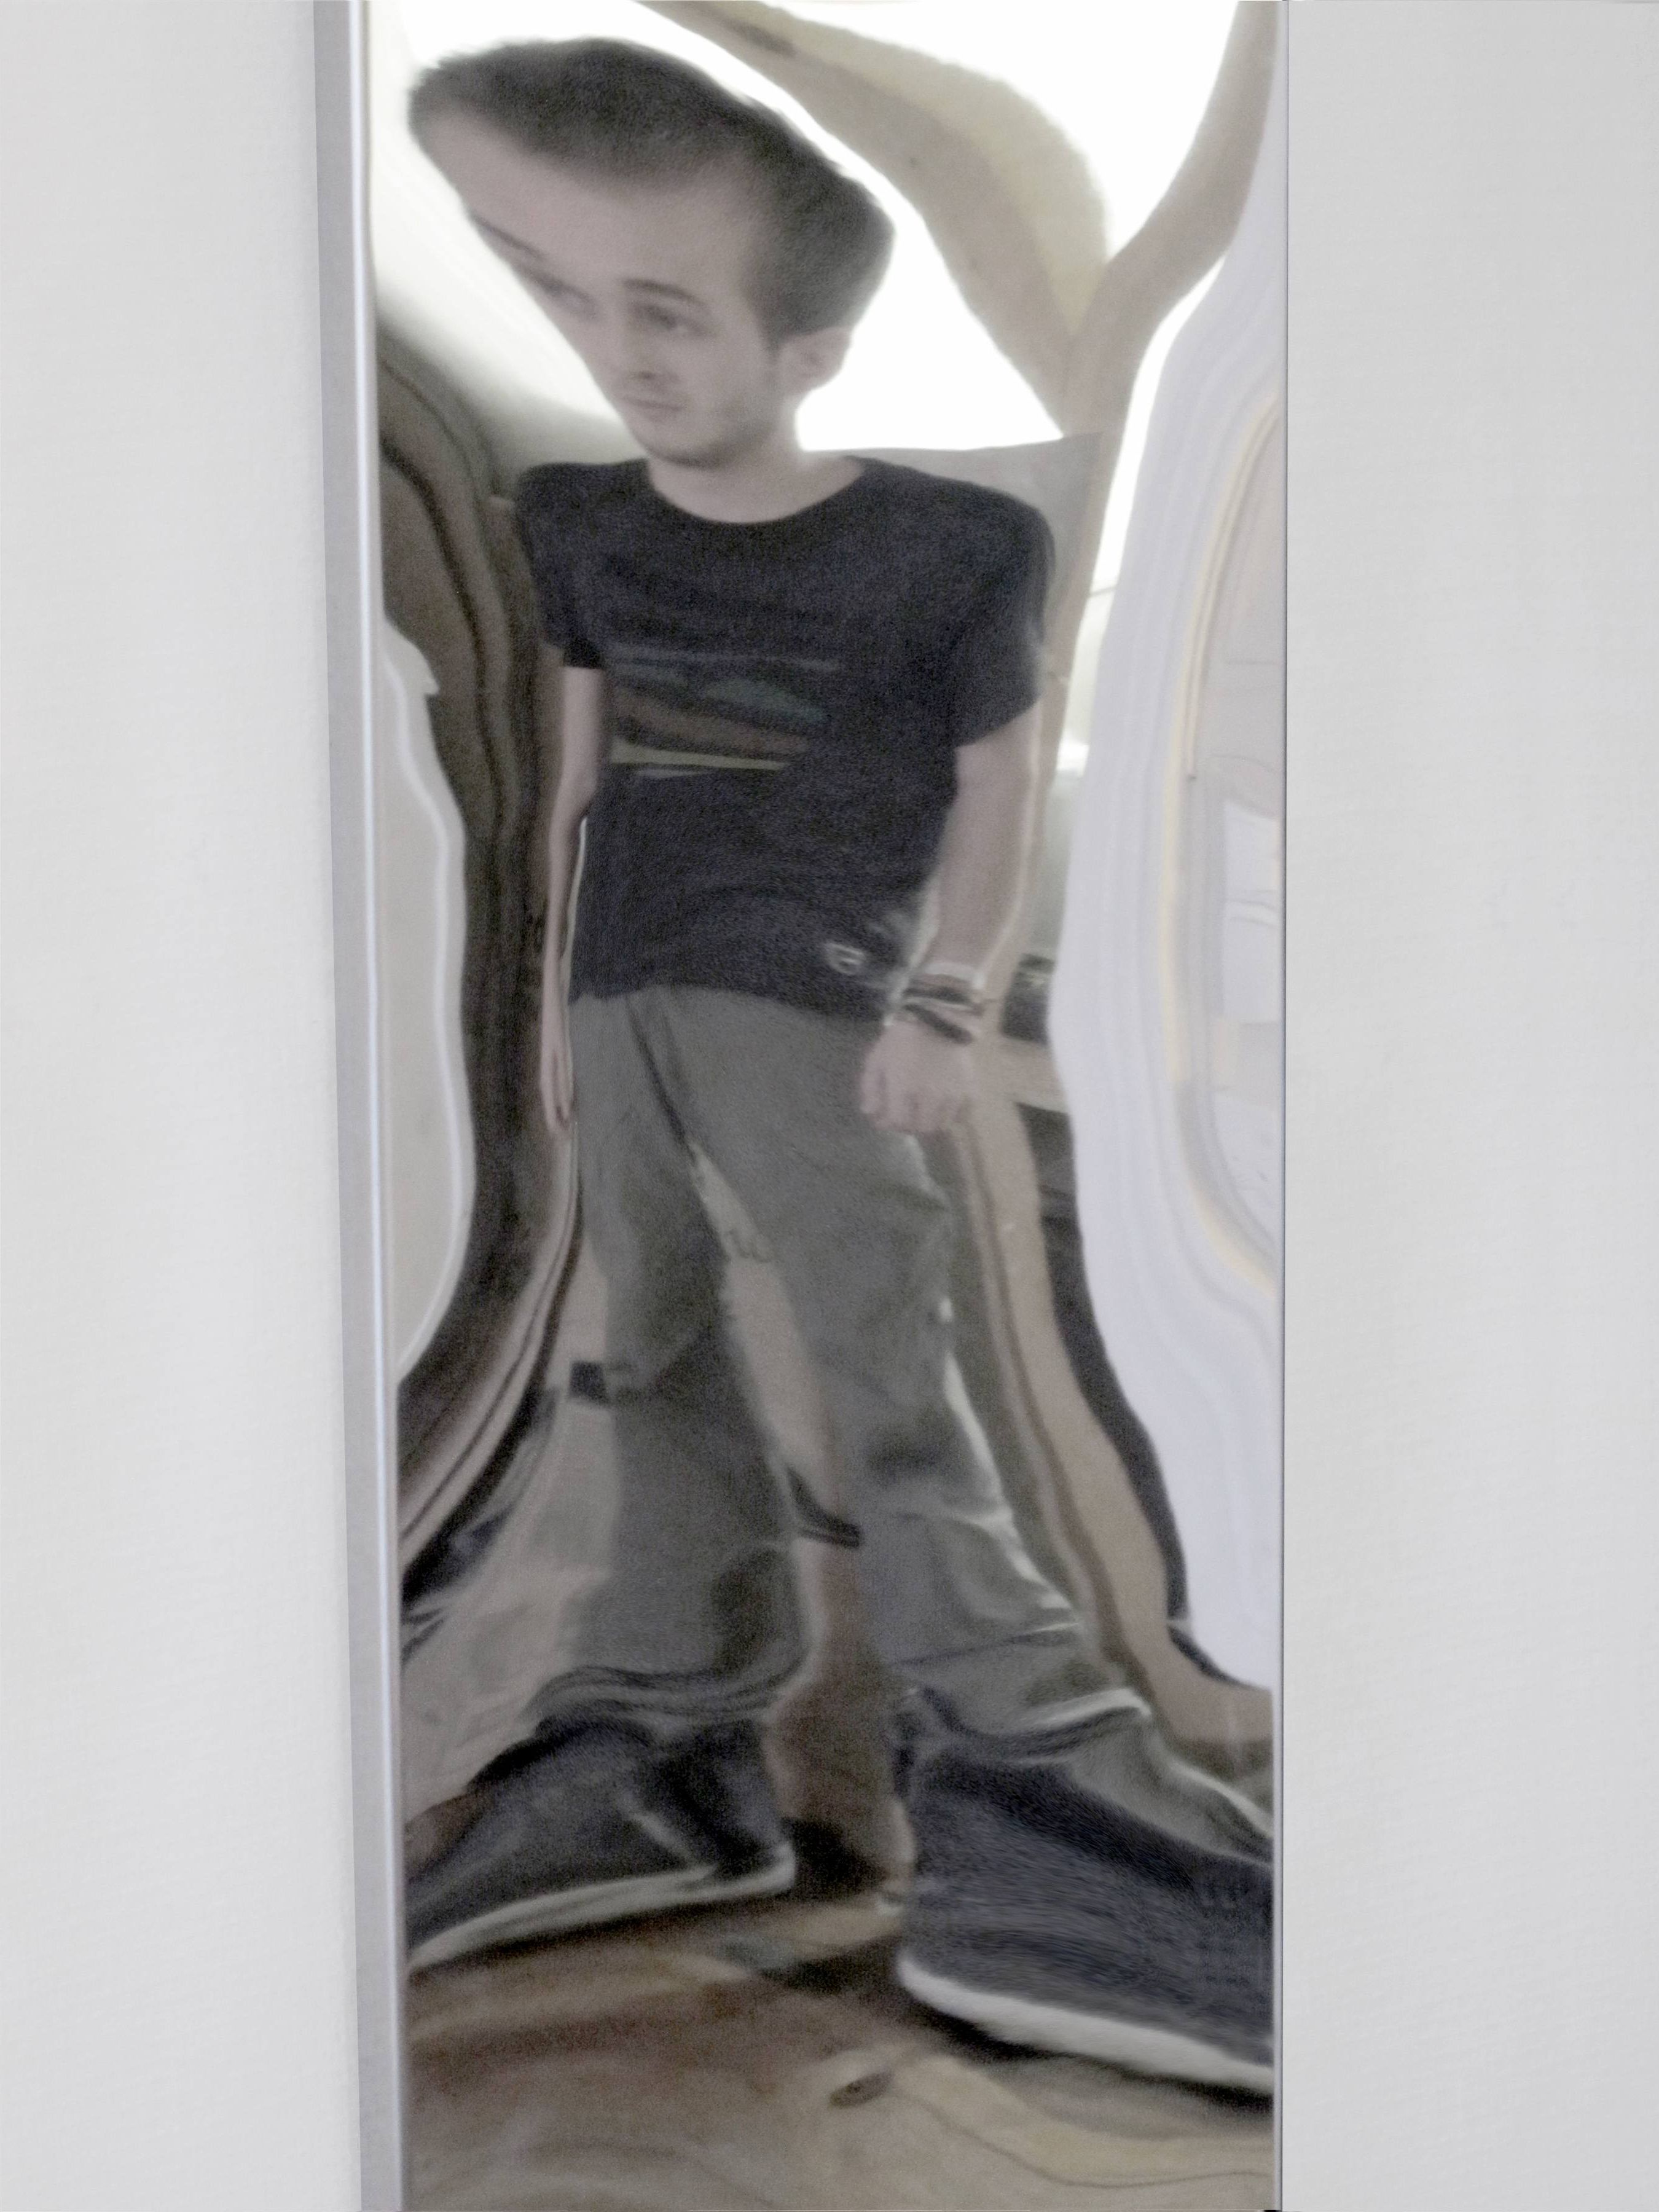 Most Recently Released Shop Flat Distorting Mirrors On Crowdyhouse Inside Flat Wall Mirrors (View 10 of 20)